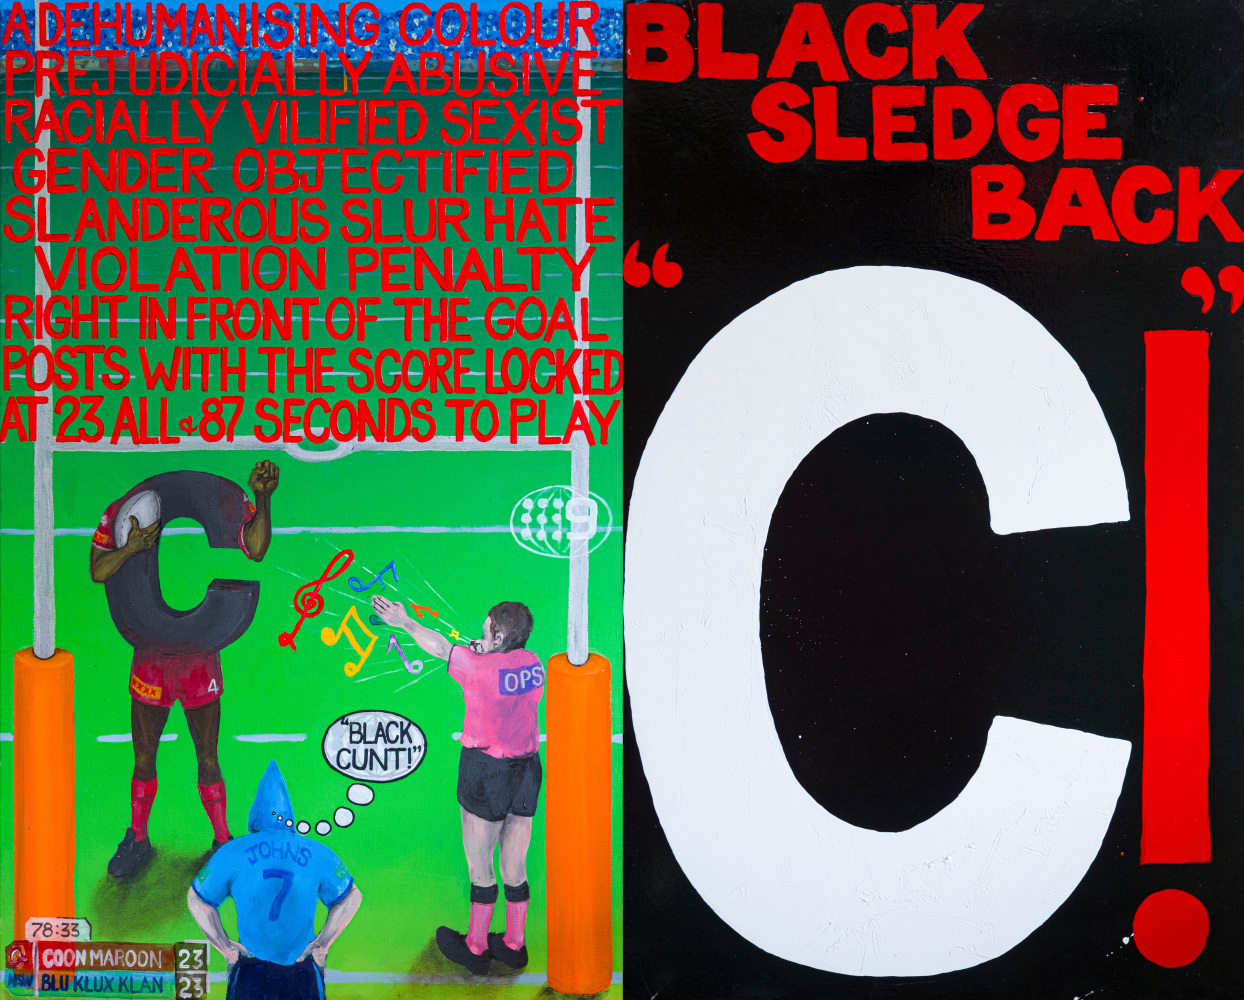 Black Cunt / Black Sledge Back, 2012
Oil on linen
47 1/4 x 30 inches (Painting 1)
47 1/4 x 30 inches (Painting 2)